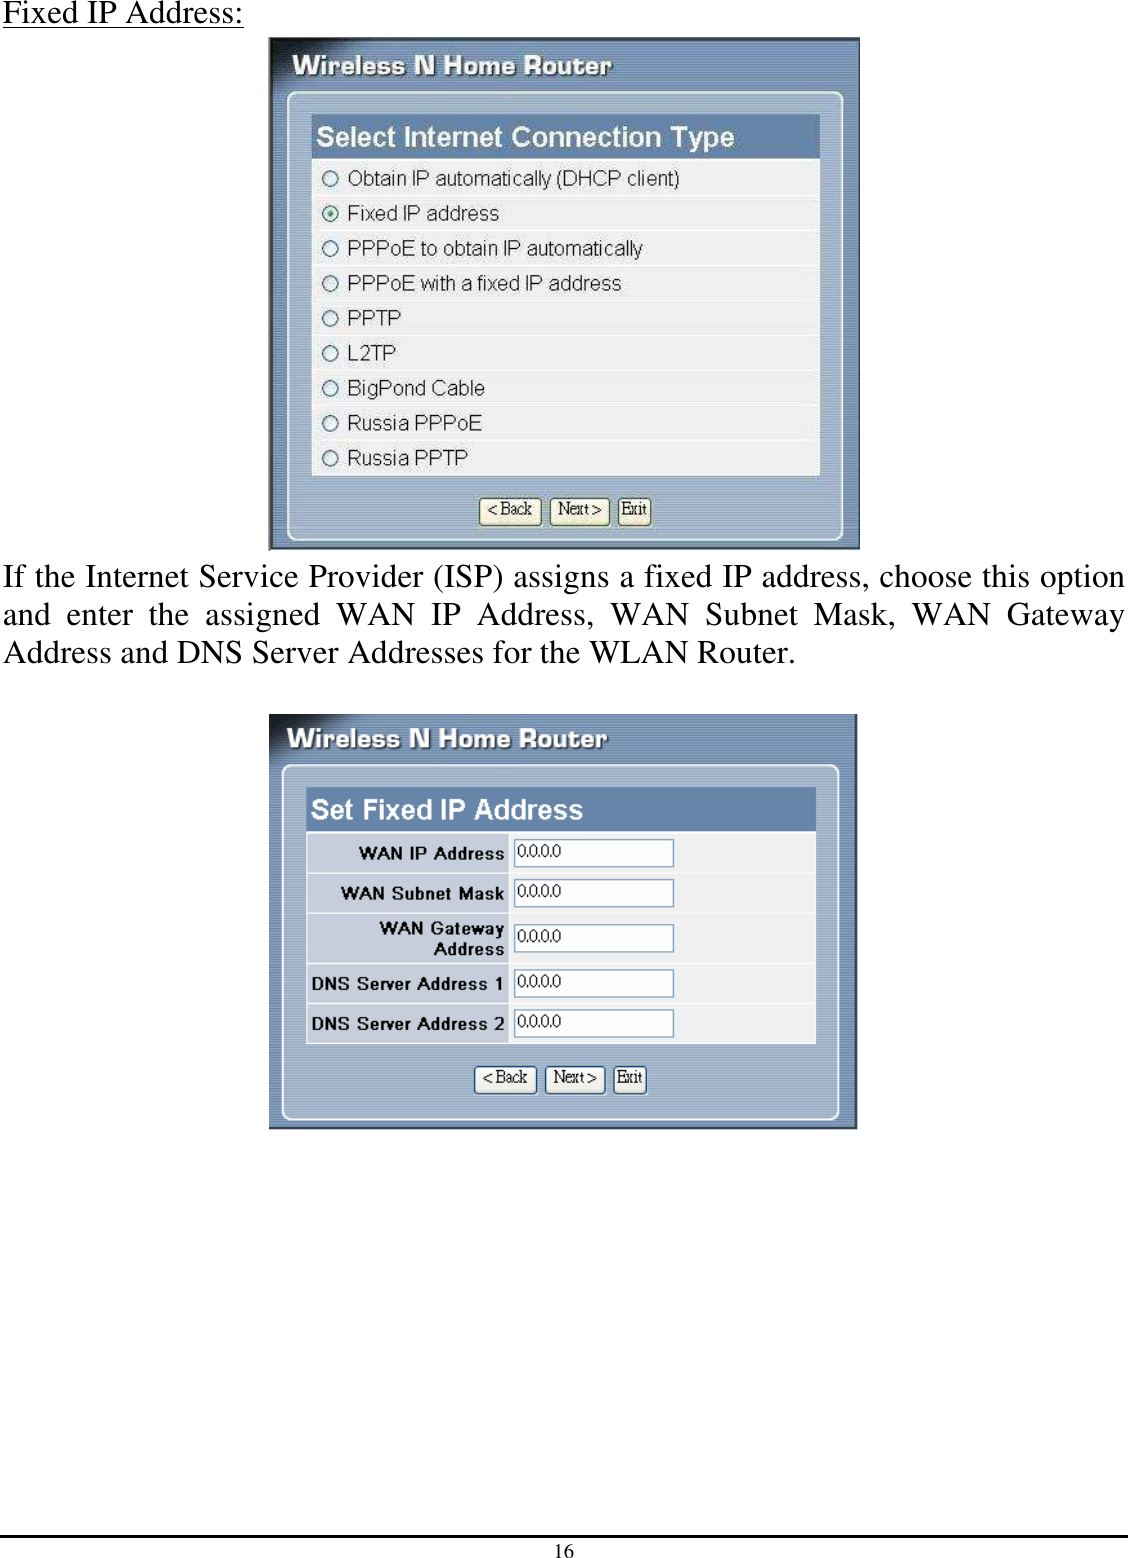 16 Fixed IP Address:  If the Internet Service Provider (ISP) assigns a fixed IP address, choose this option and  enter  the  assigned  WAN  IP  Address,  WAN  Subnet  Mask,  WAN  Gateway Address and DNS Server Addresses for the WLAN Router.    